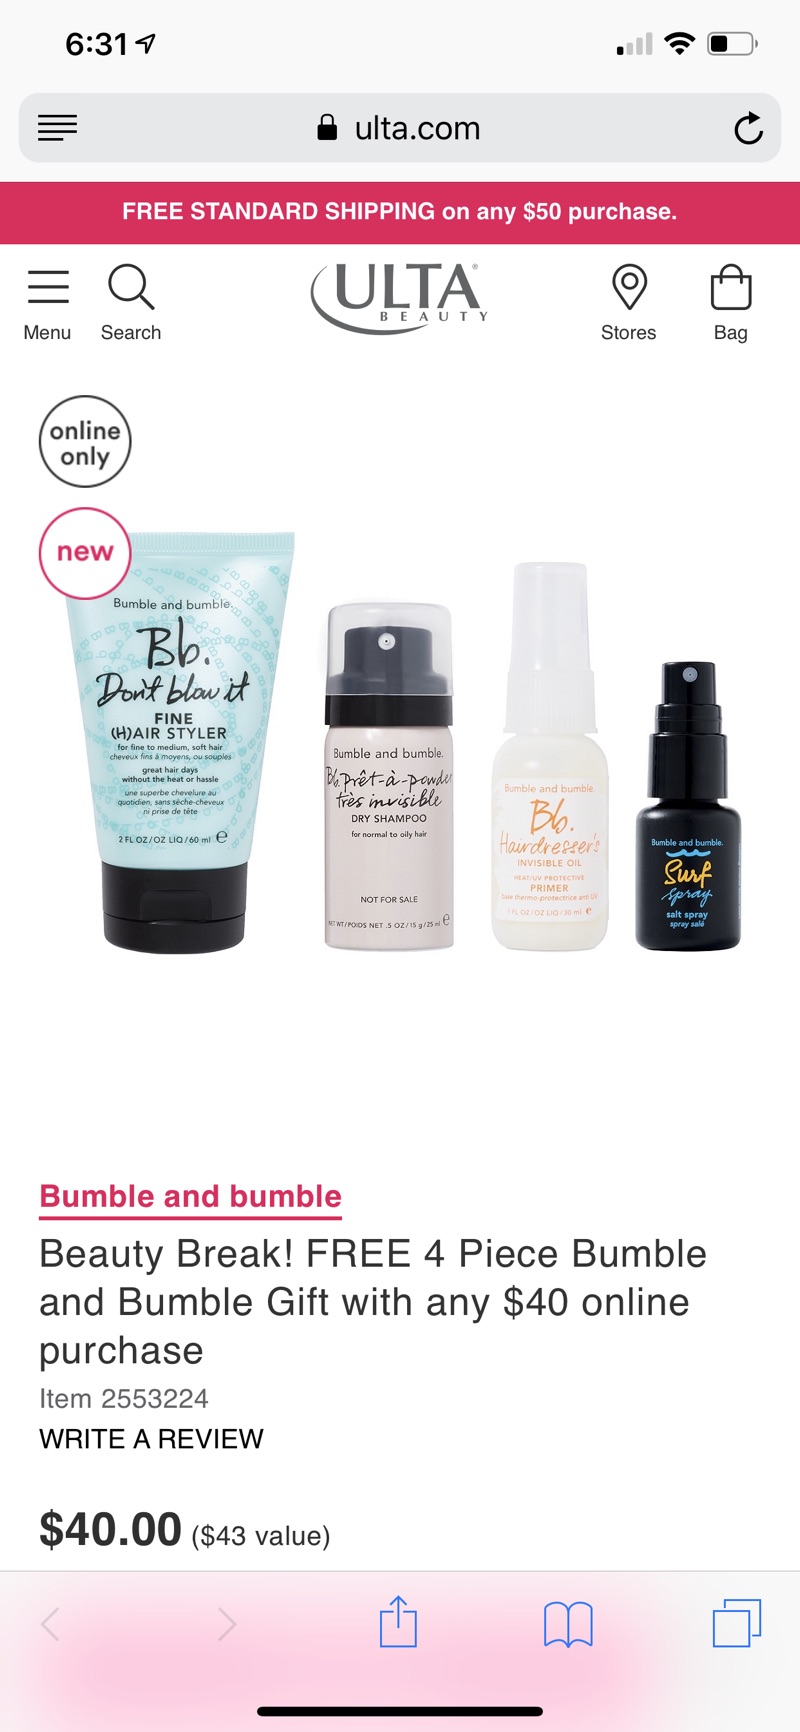 Bumble and bumble Beauty Break! FREE 4 Piece Bumble and Bumble Gift with any $40 online purchase | Ulta Beauty 满40送4件套，价值$43